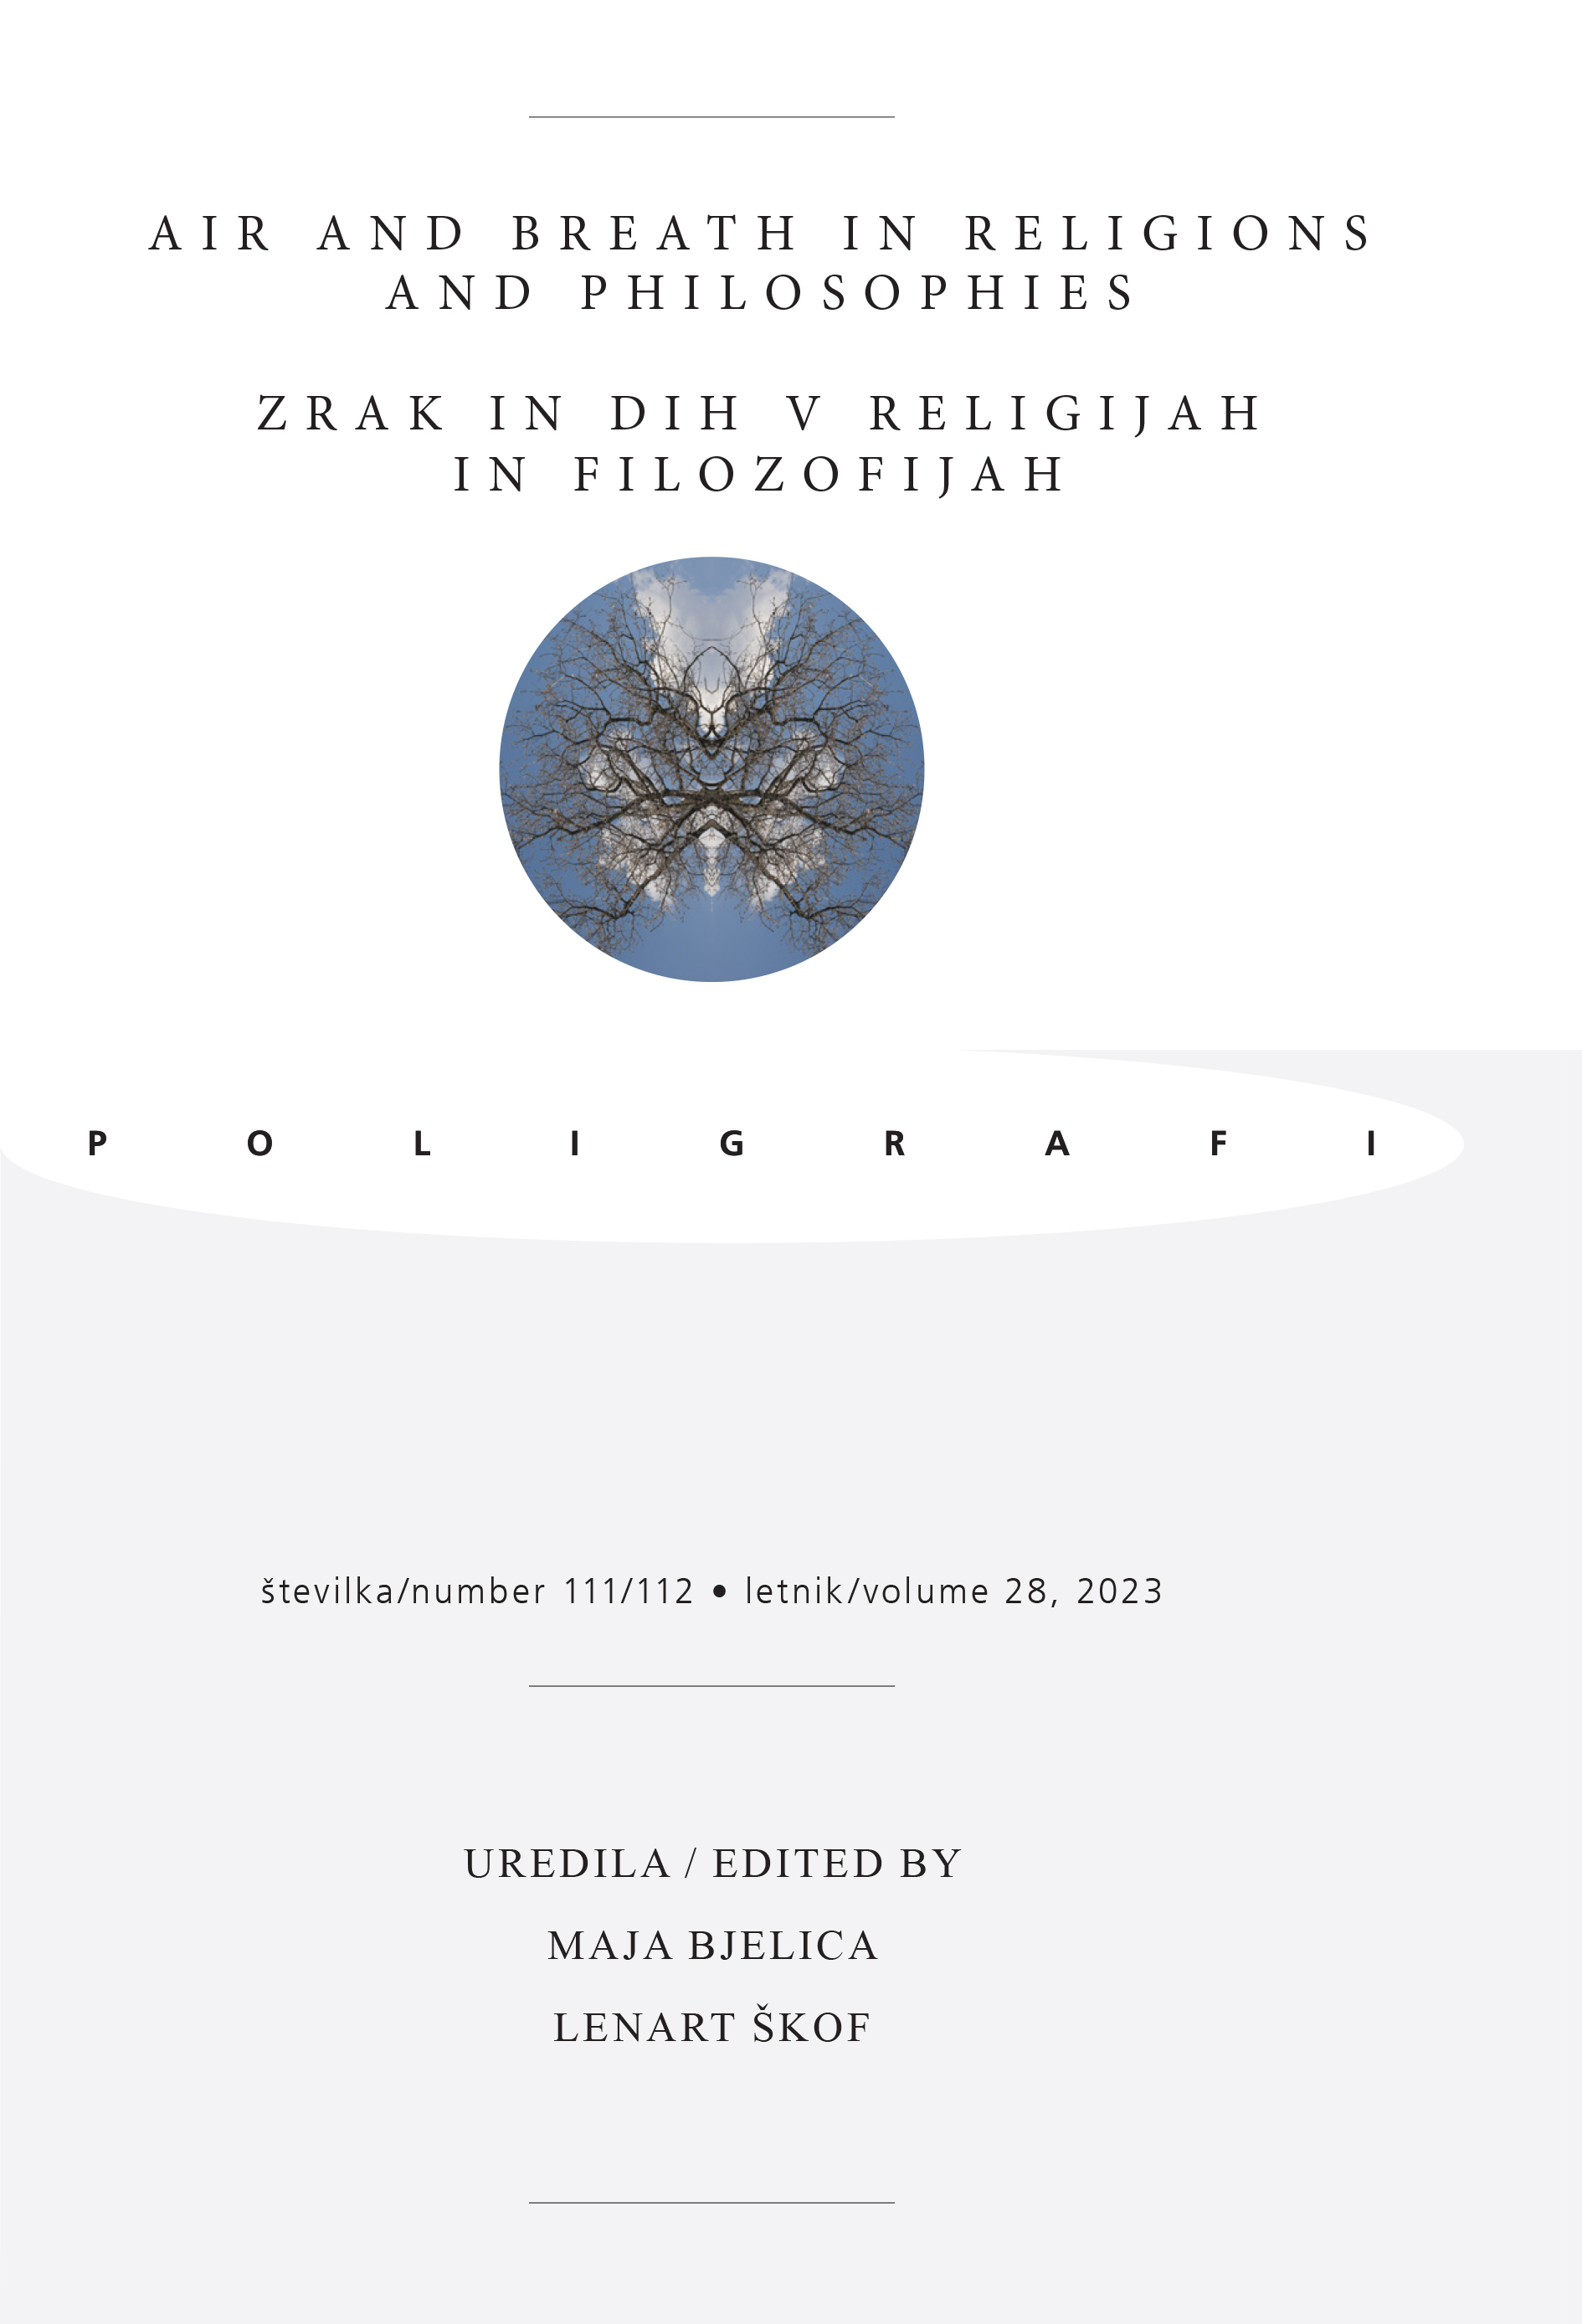 					View Vol. 28 No. 111/112 (2023): Air and Breath in Religions and Philosophies
				